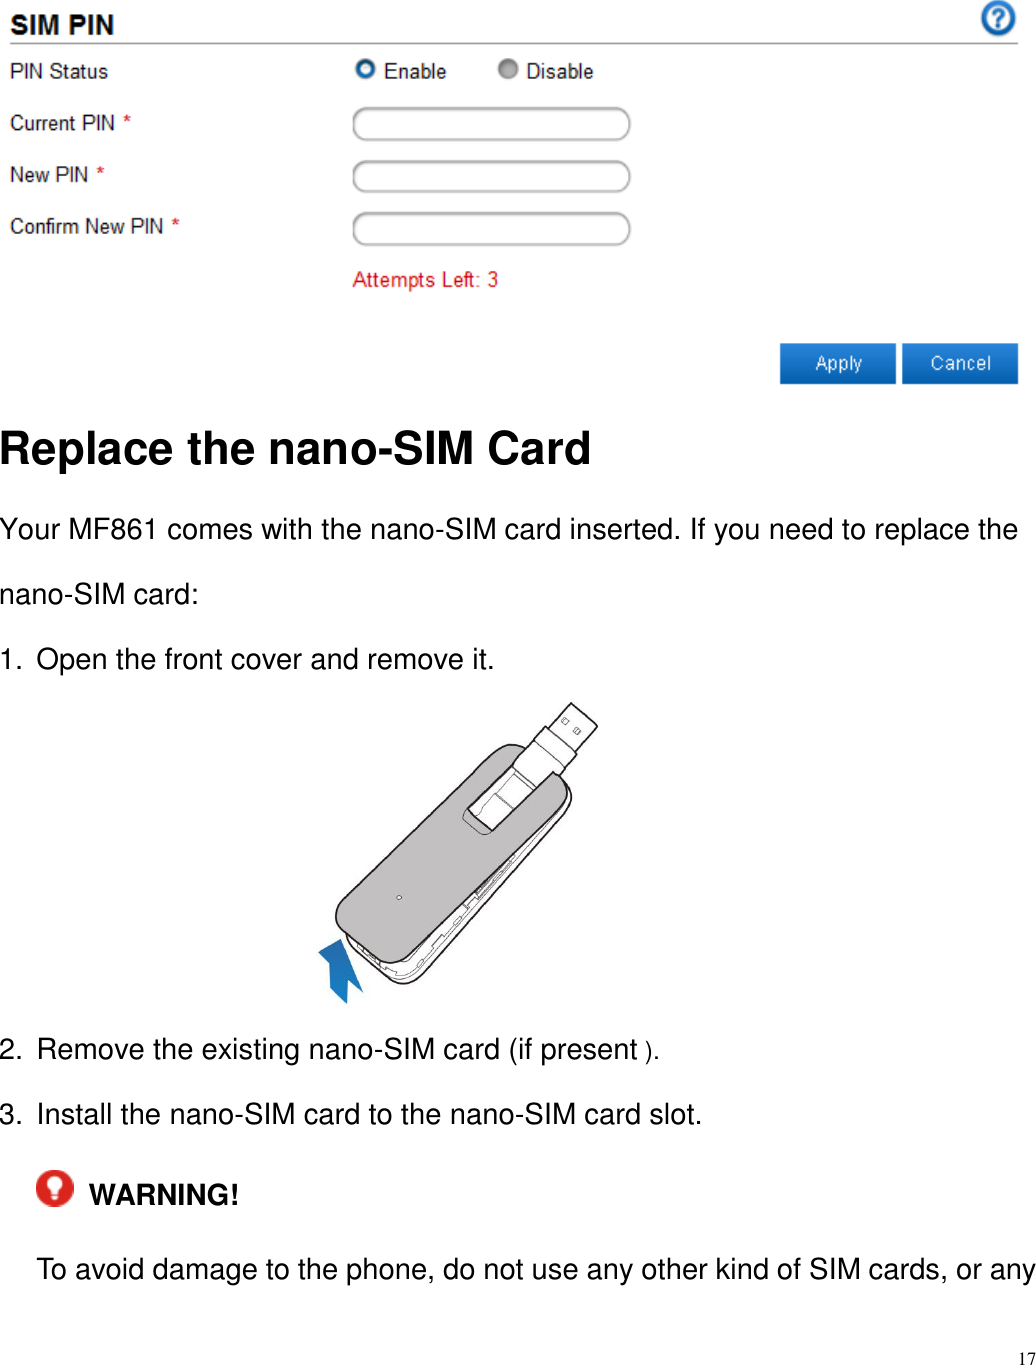 17   Replace the nano-SIM Card Your MF861 comes with the nano-SIM card inserted. If you need to replace the nano-SIM card: 1.  Open the front cover and remove it.                      2.  Remove the existing nano-SIM card (if present ).   3.  Install the nano-SIM card to the nano-SIM card slot.   WARNING!   To avoid damage to the phone, do not use any other kind of SIM cards, or any 